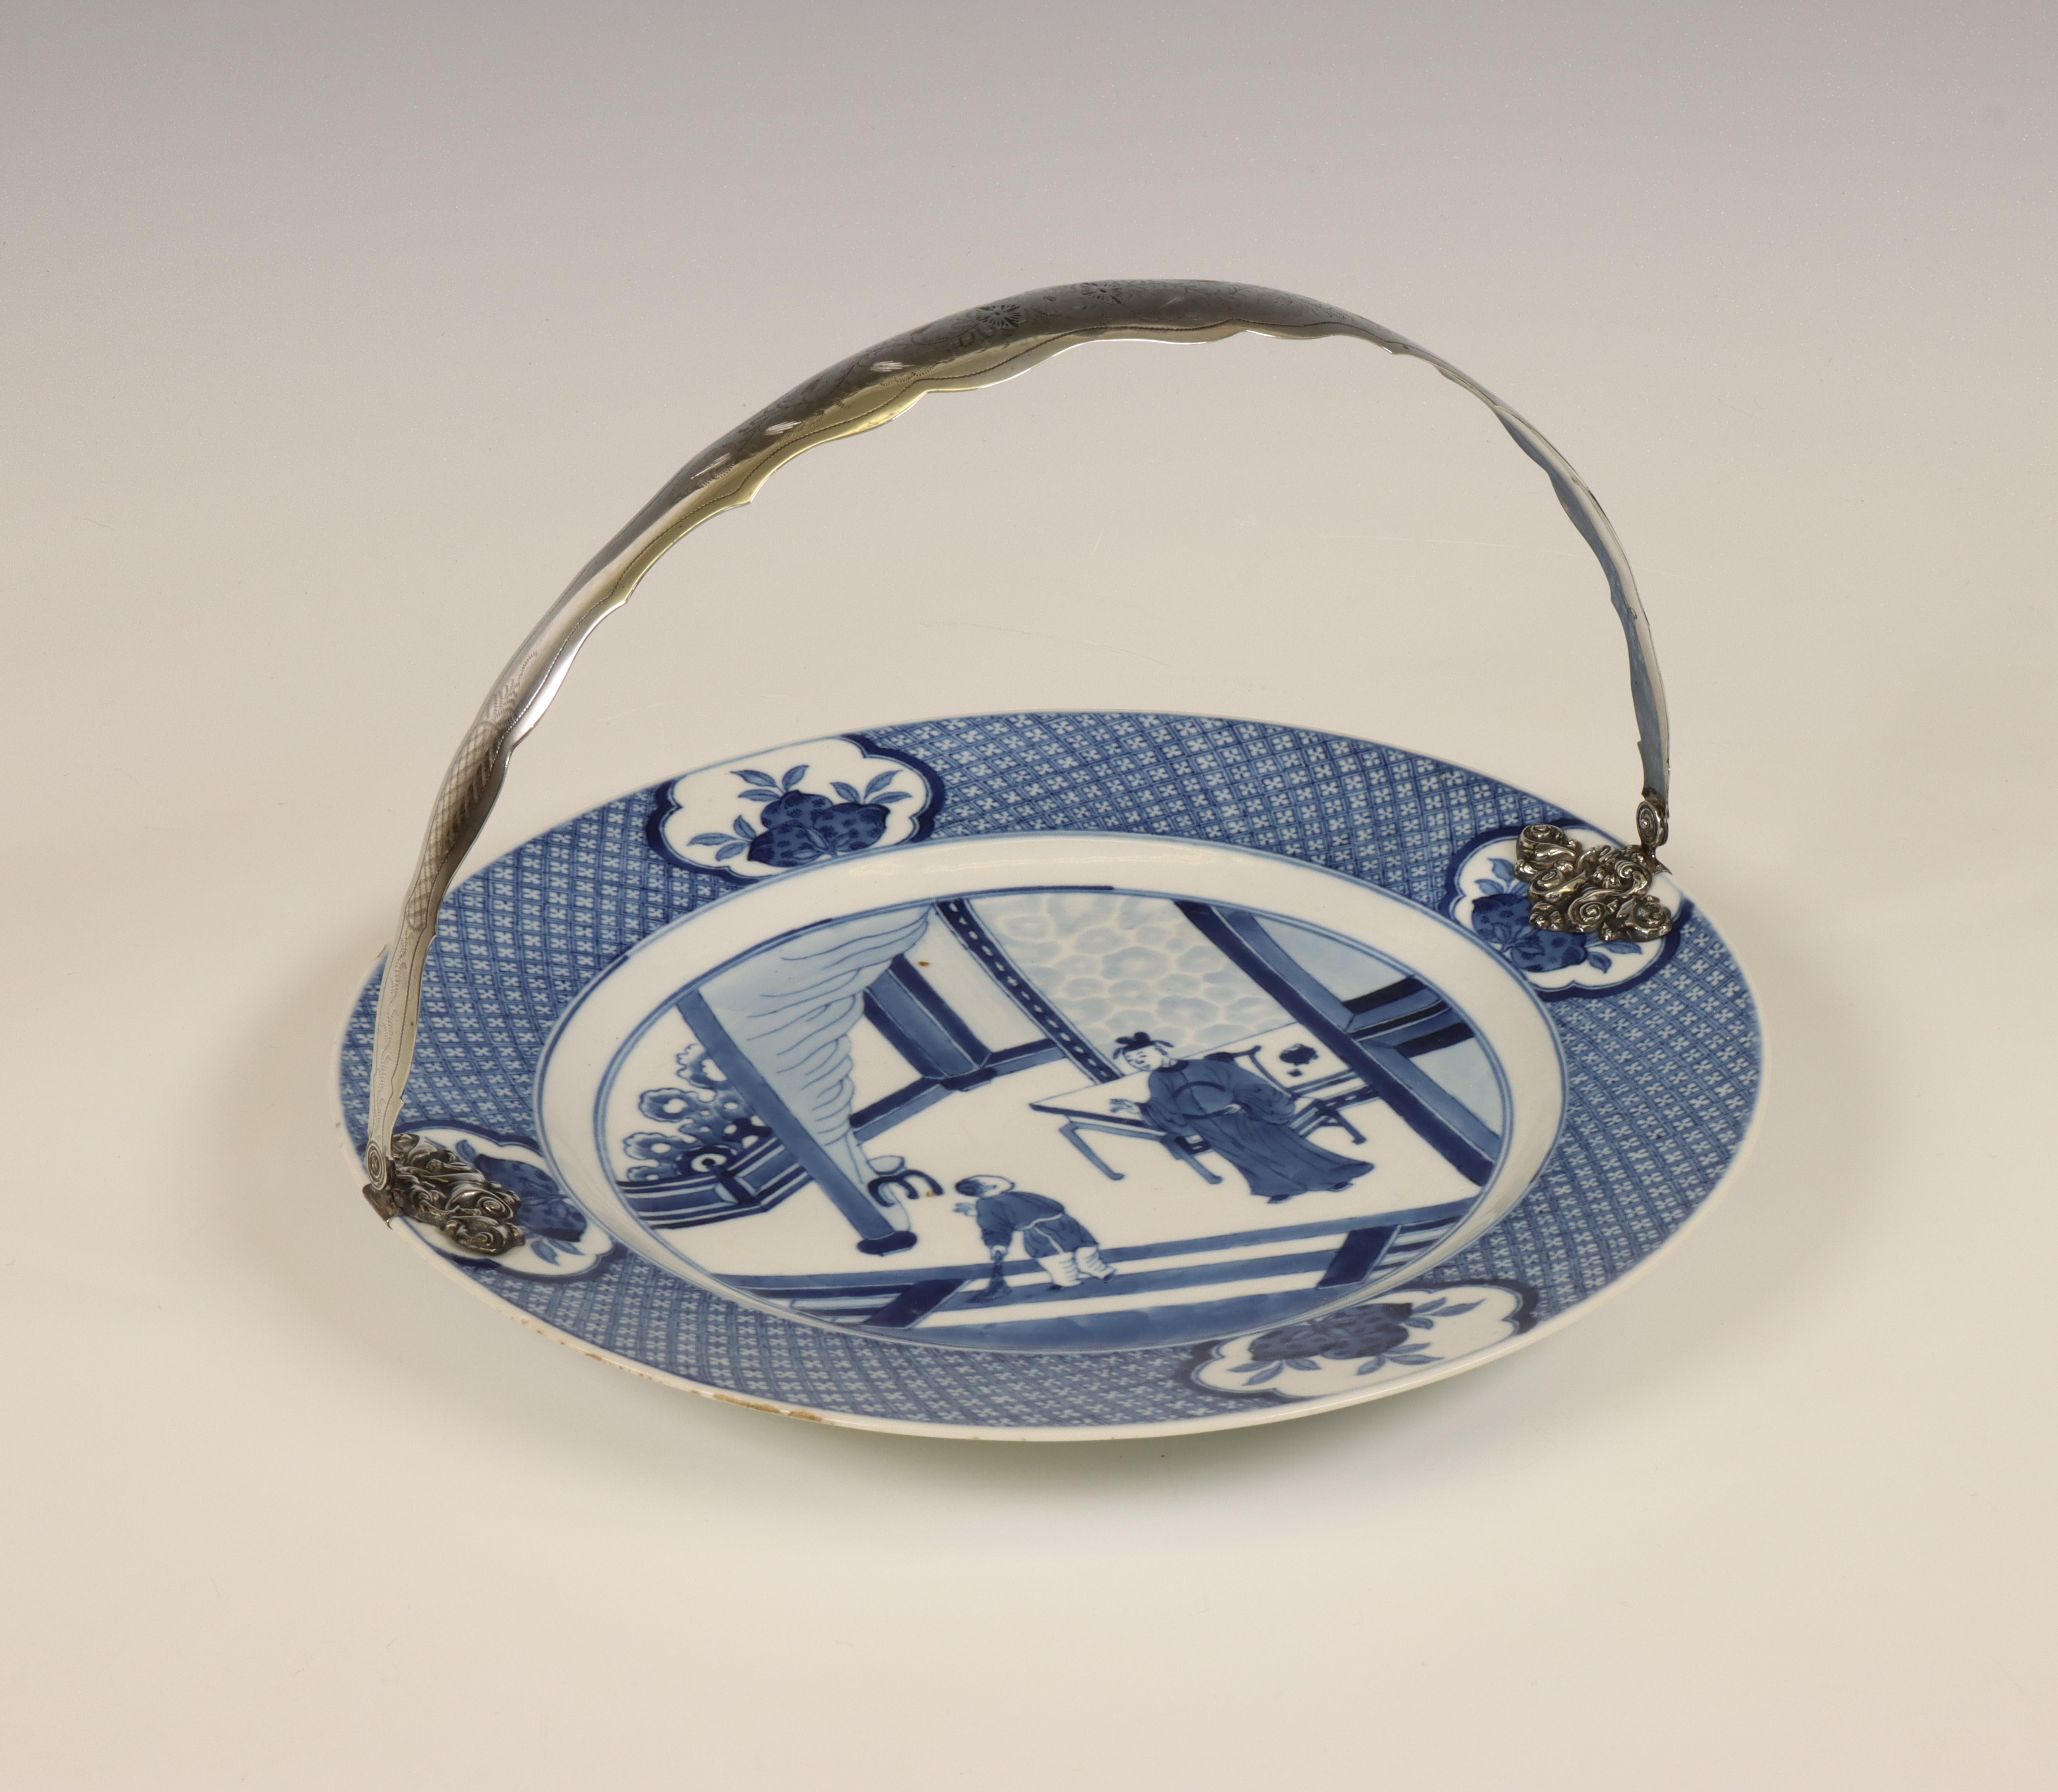 China, silver-mounted blue and white porcelain dish, Kangxi period (1662-1722), the Dutch silver 19t